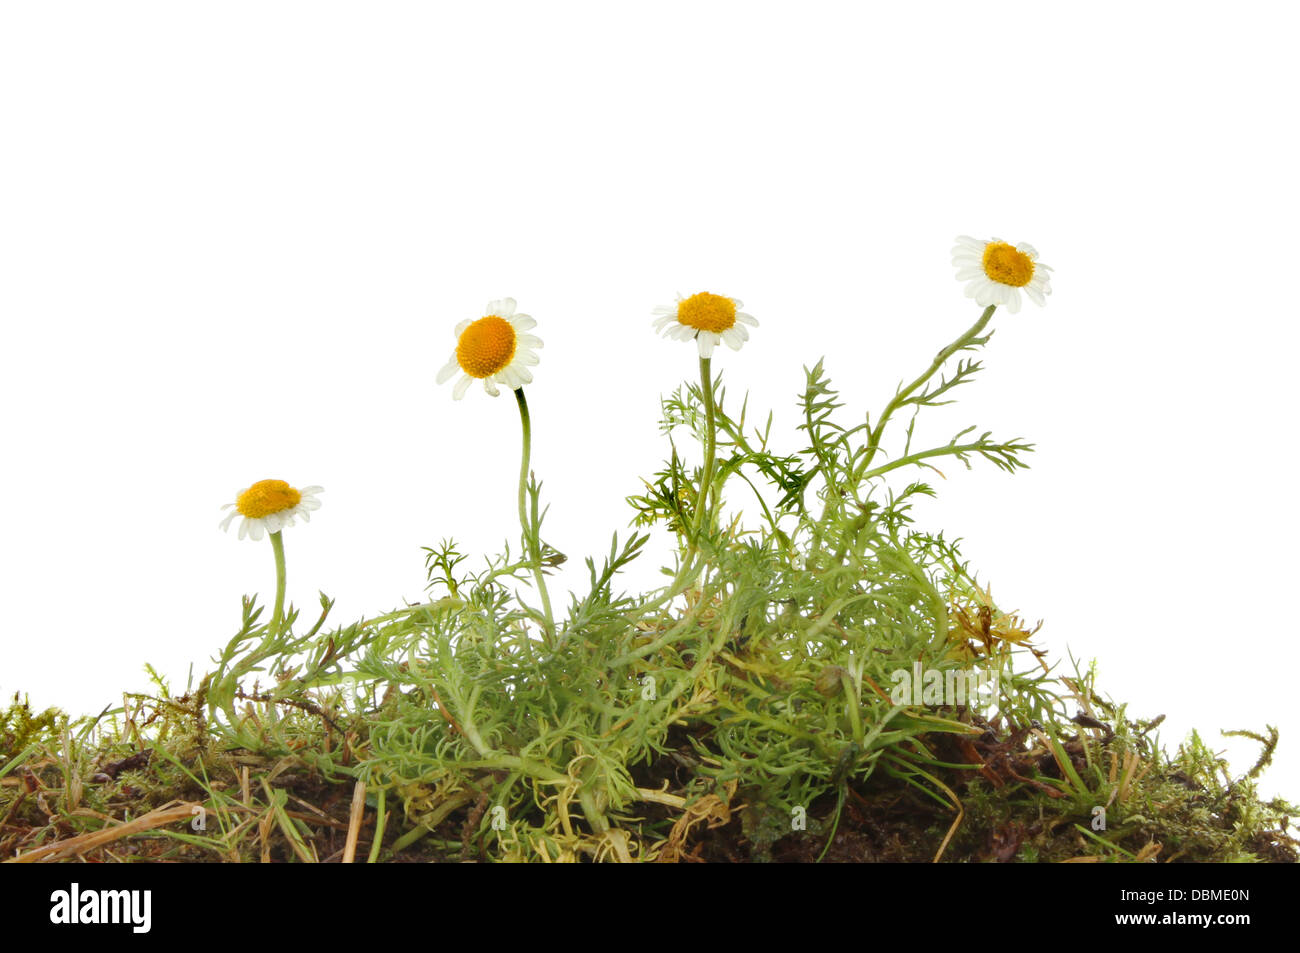 Chamomile plant, flowers and foliage against a white background Stock Photo